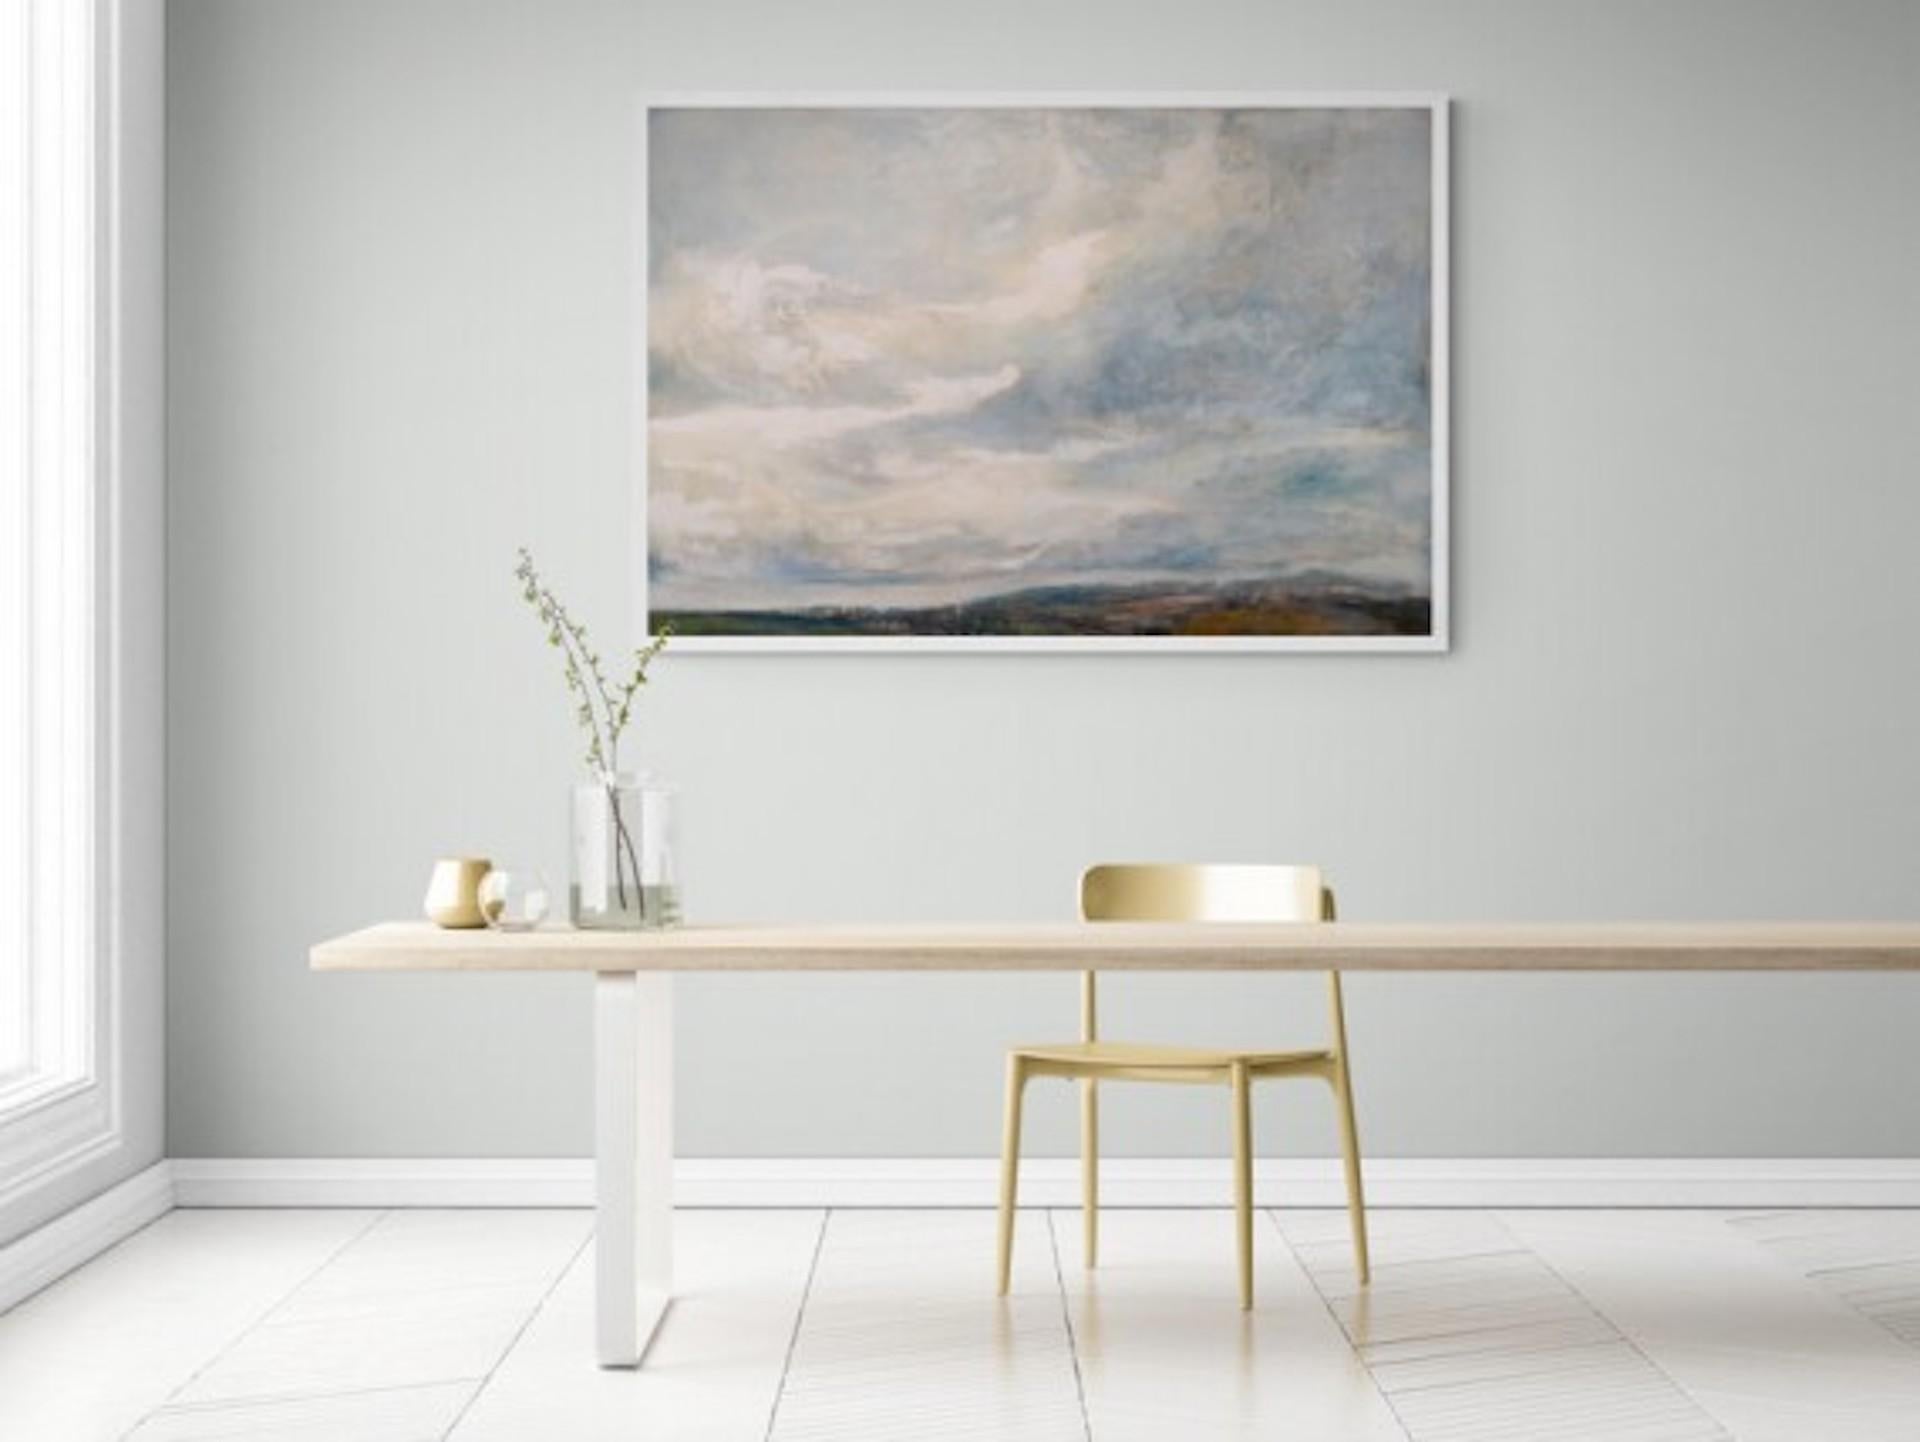 Chromatic Grey Skies [2020]
Original
Landscapes and seascapes
Ink and gesso on birch panel
Image size: H:100 cm x W:150 cm
Complete Size of Unframed Work: H:100 cm x W:150 cm x D:3.2cm
Sold Unframed
Please note that insitu images are purely an